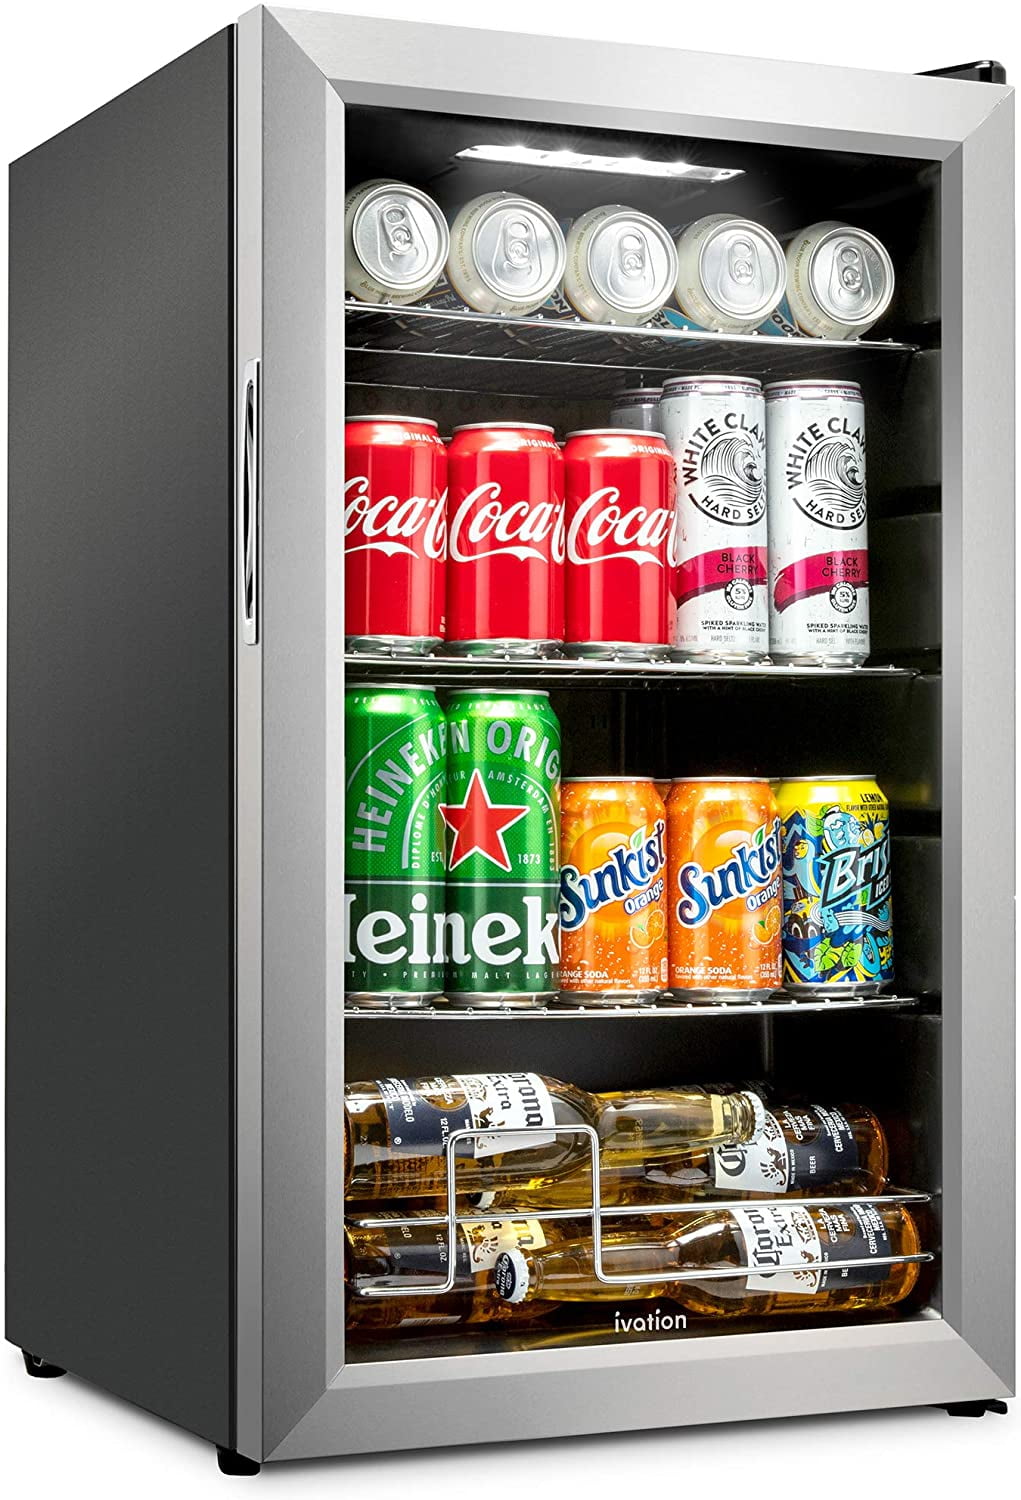 Hotels Are Now Charging $50 to Put Your Own Stuff in the Mini Fridge